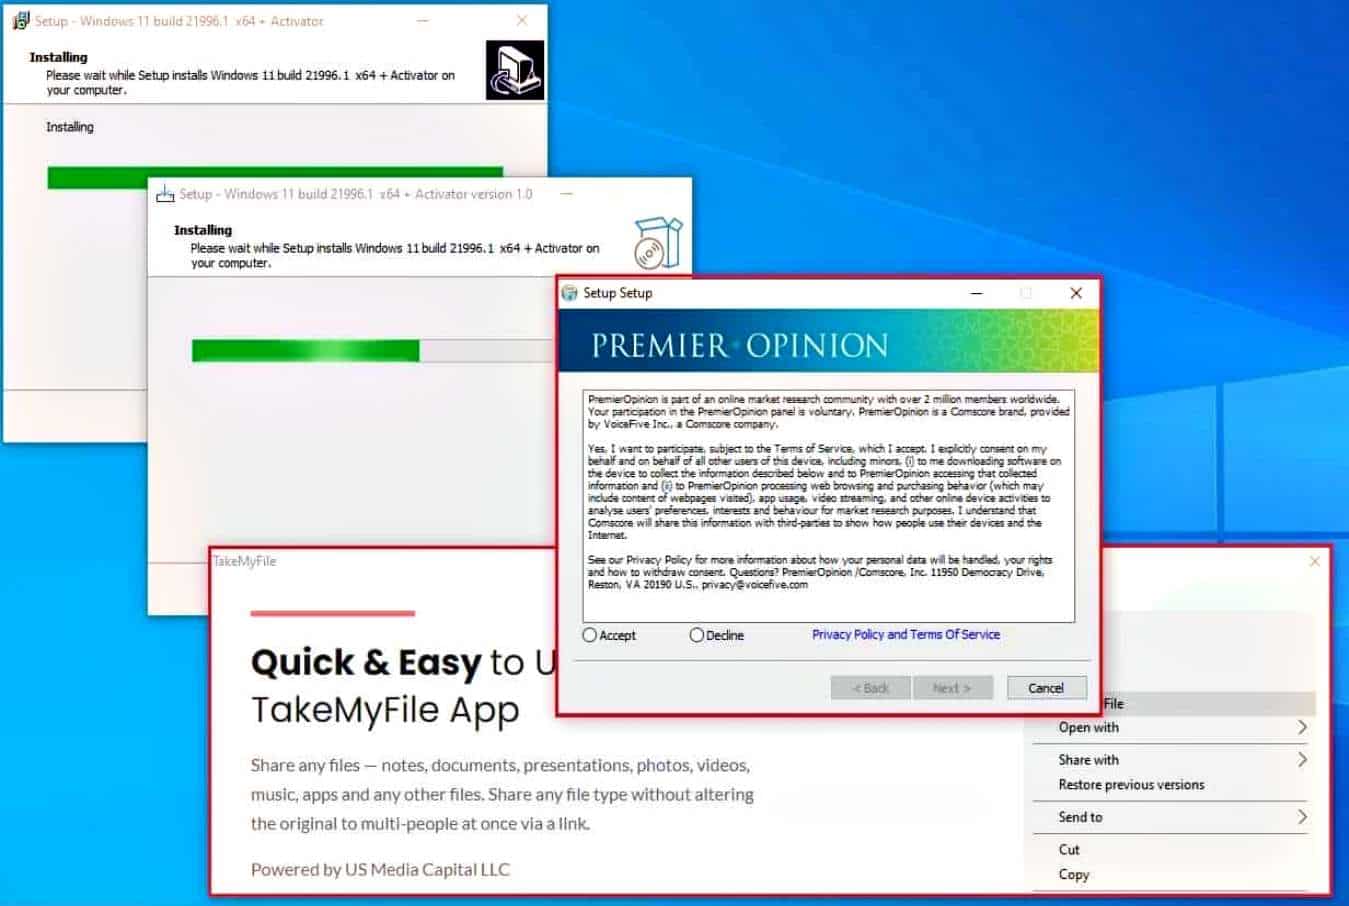 Fake Windows 11 installers infecting devices with adware, malware